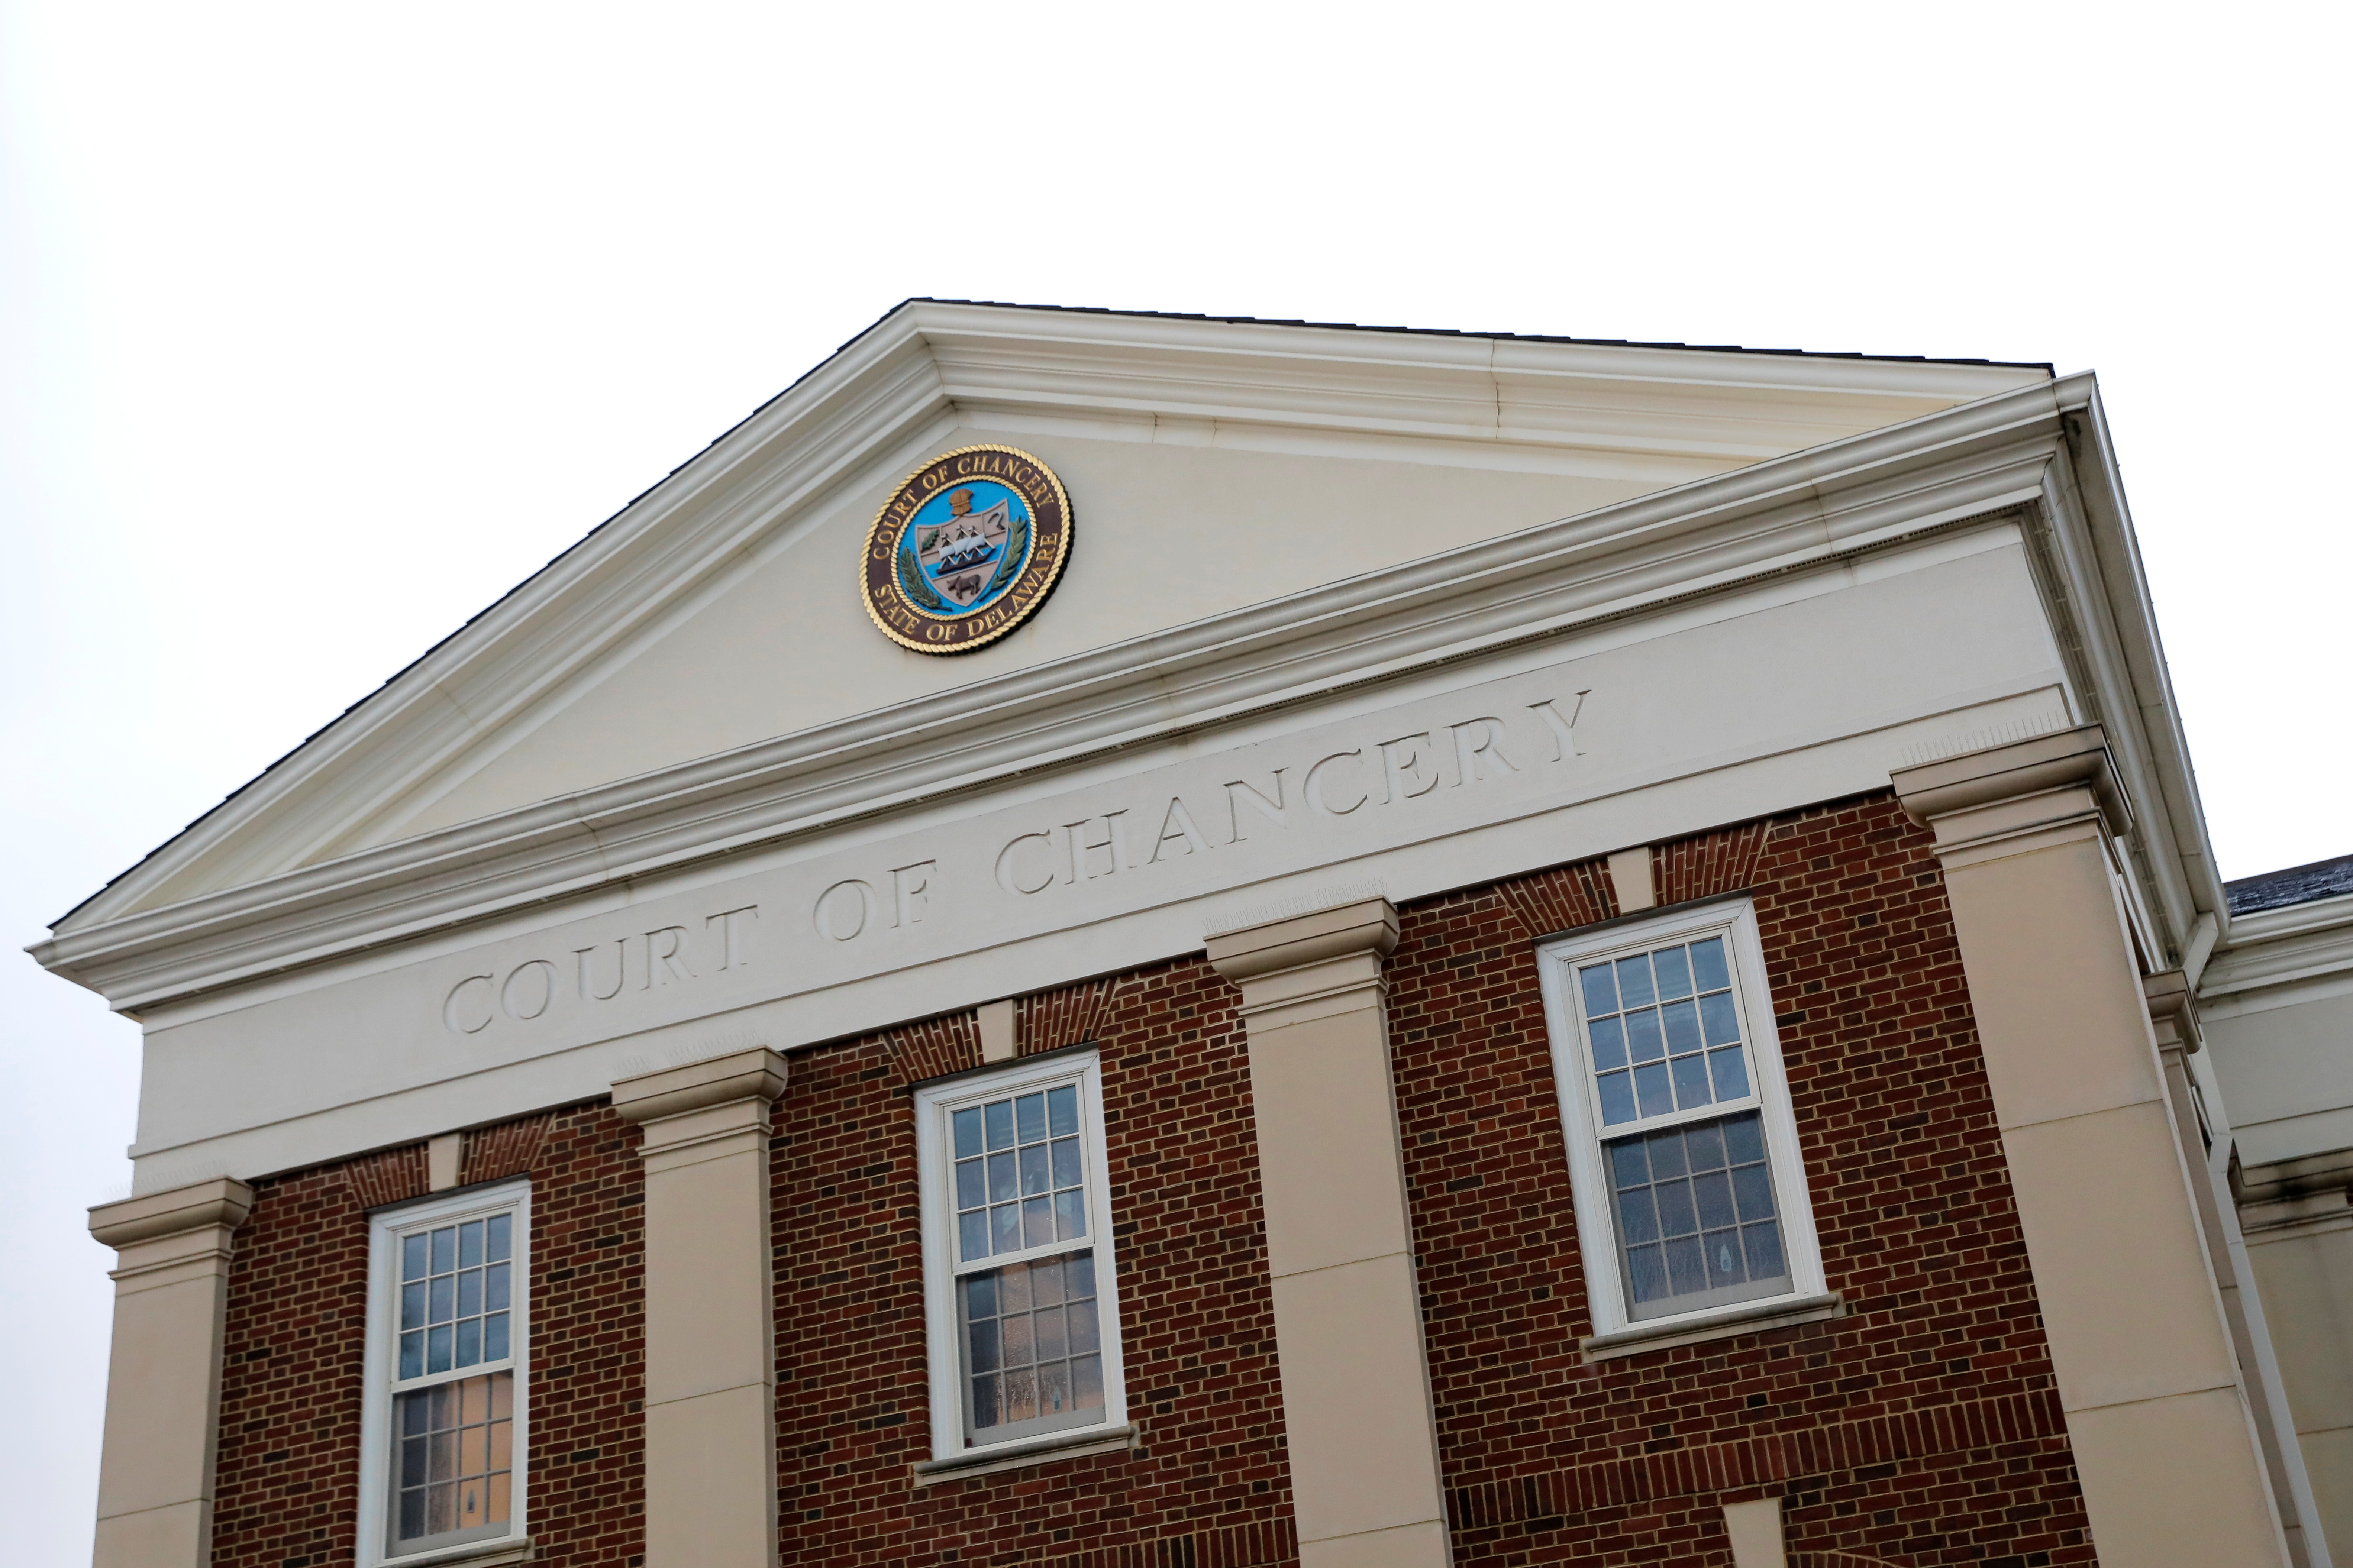 Signage is seen on the exterior of the Sussex County Court of Chancery in Georgetown, Delaware. REUTERS/Andrew Kelly